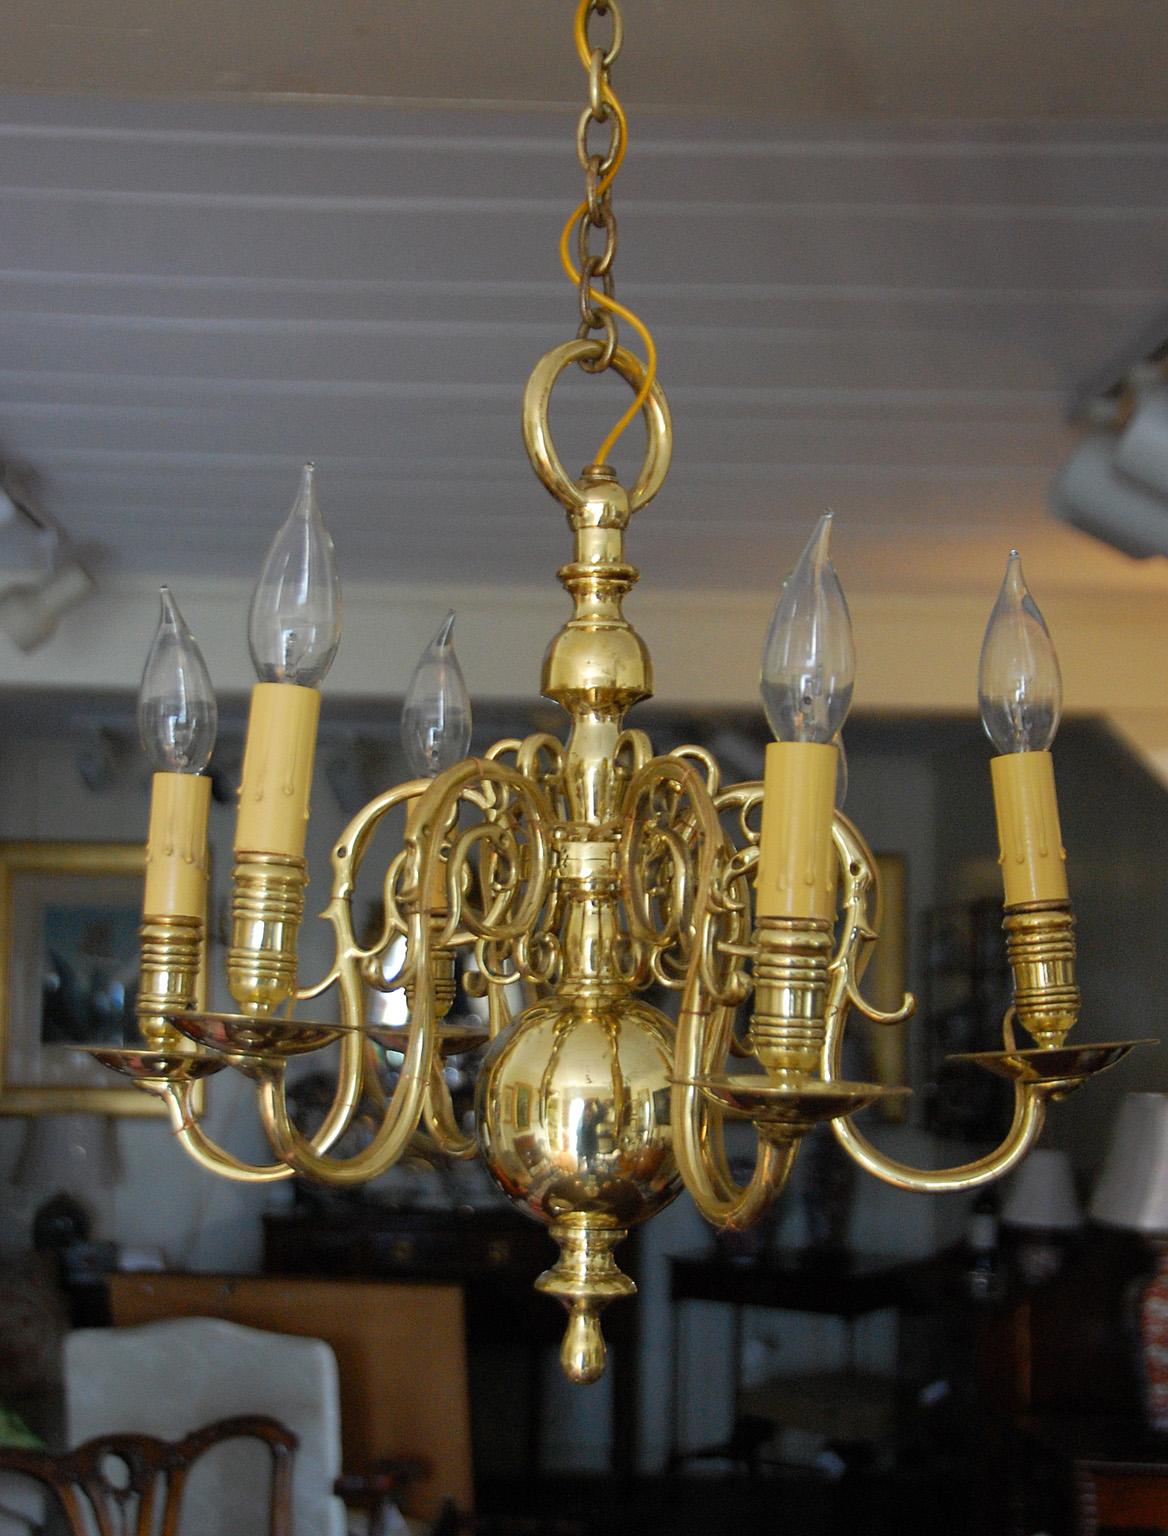 English Chippendale period Georgian brass chandelier with six removable arms (the arms are all pinned with brass pins as one would expect in this period), pendant ball, ringed candleholders. This chandelier has been newly electrified. Circa 1790.